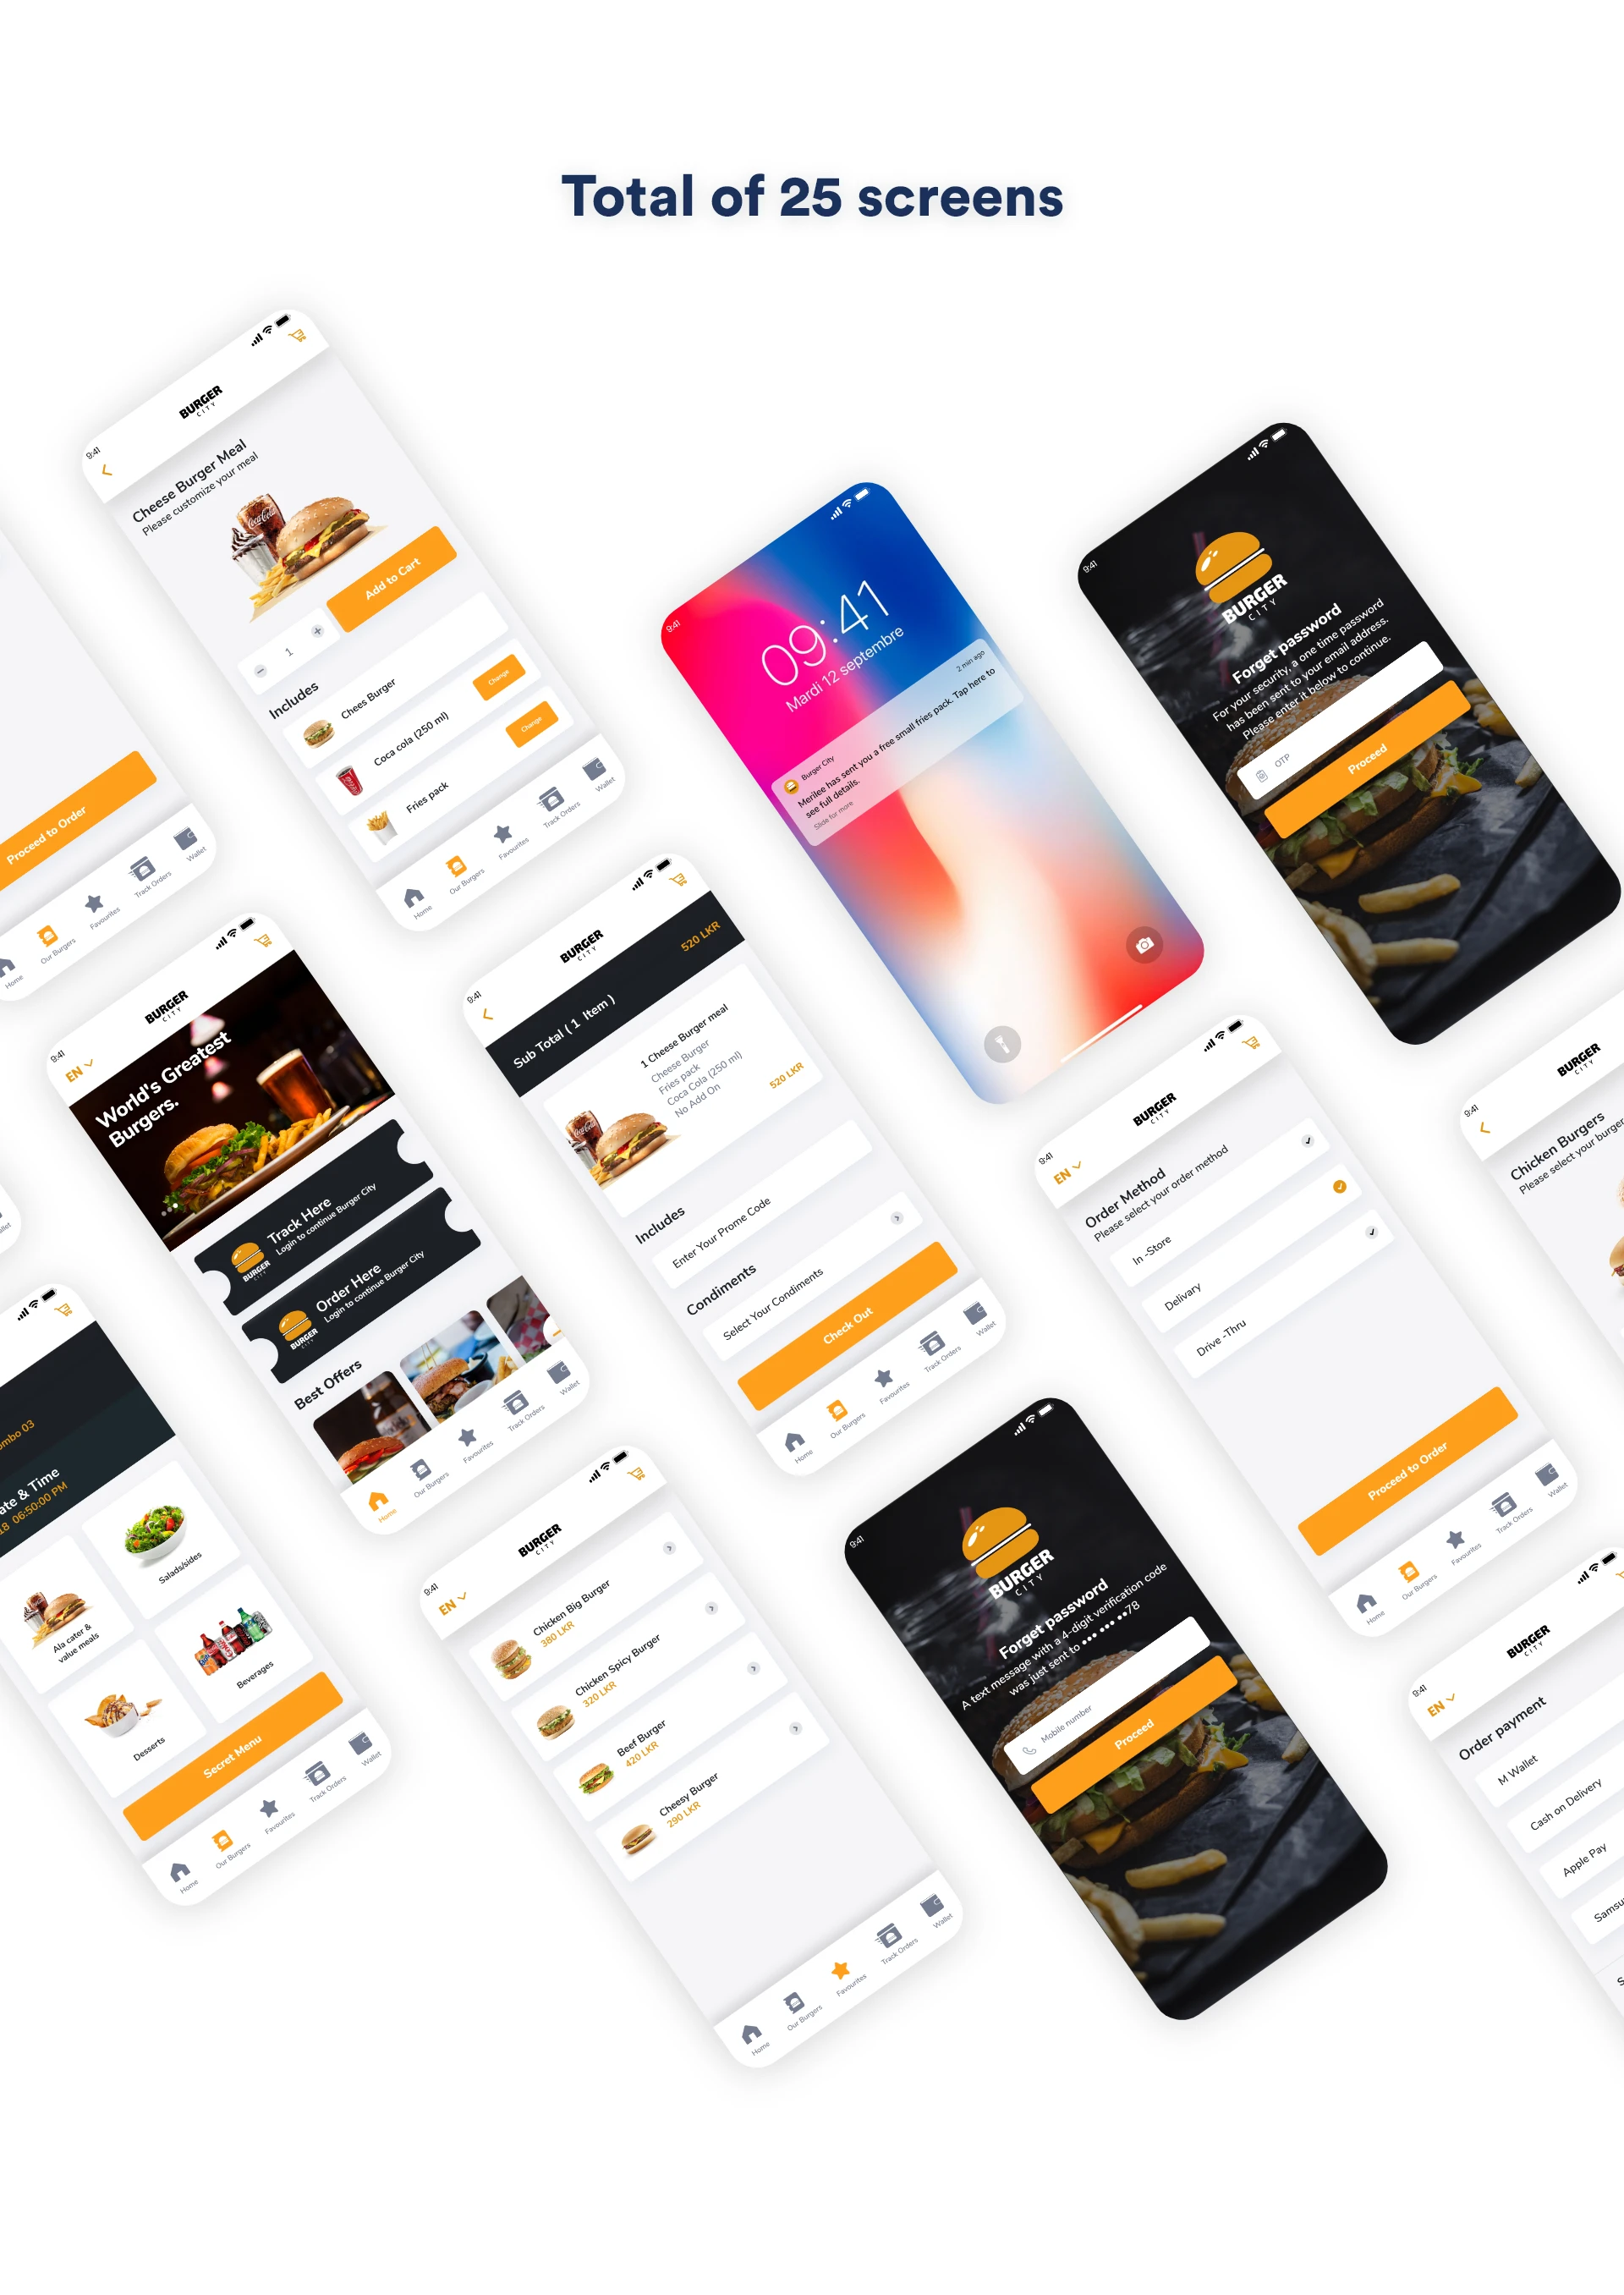 Burger City - Free Adobe XD UI Kit - A mobile UI kit for a burger store. 25 screens for you to get started.